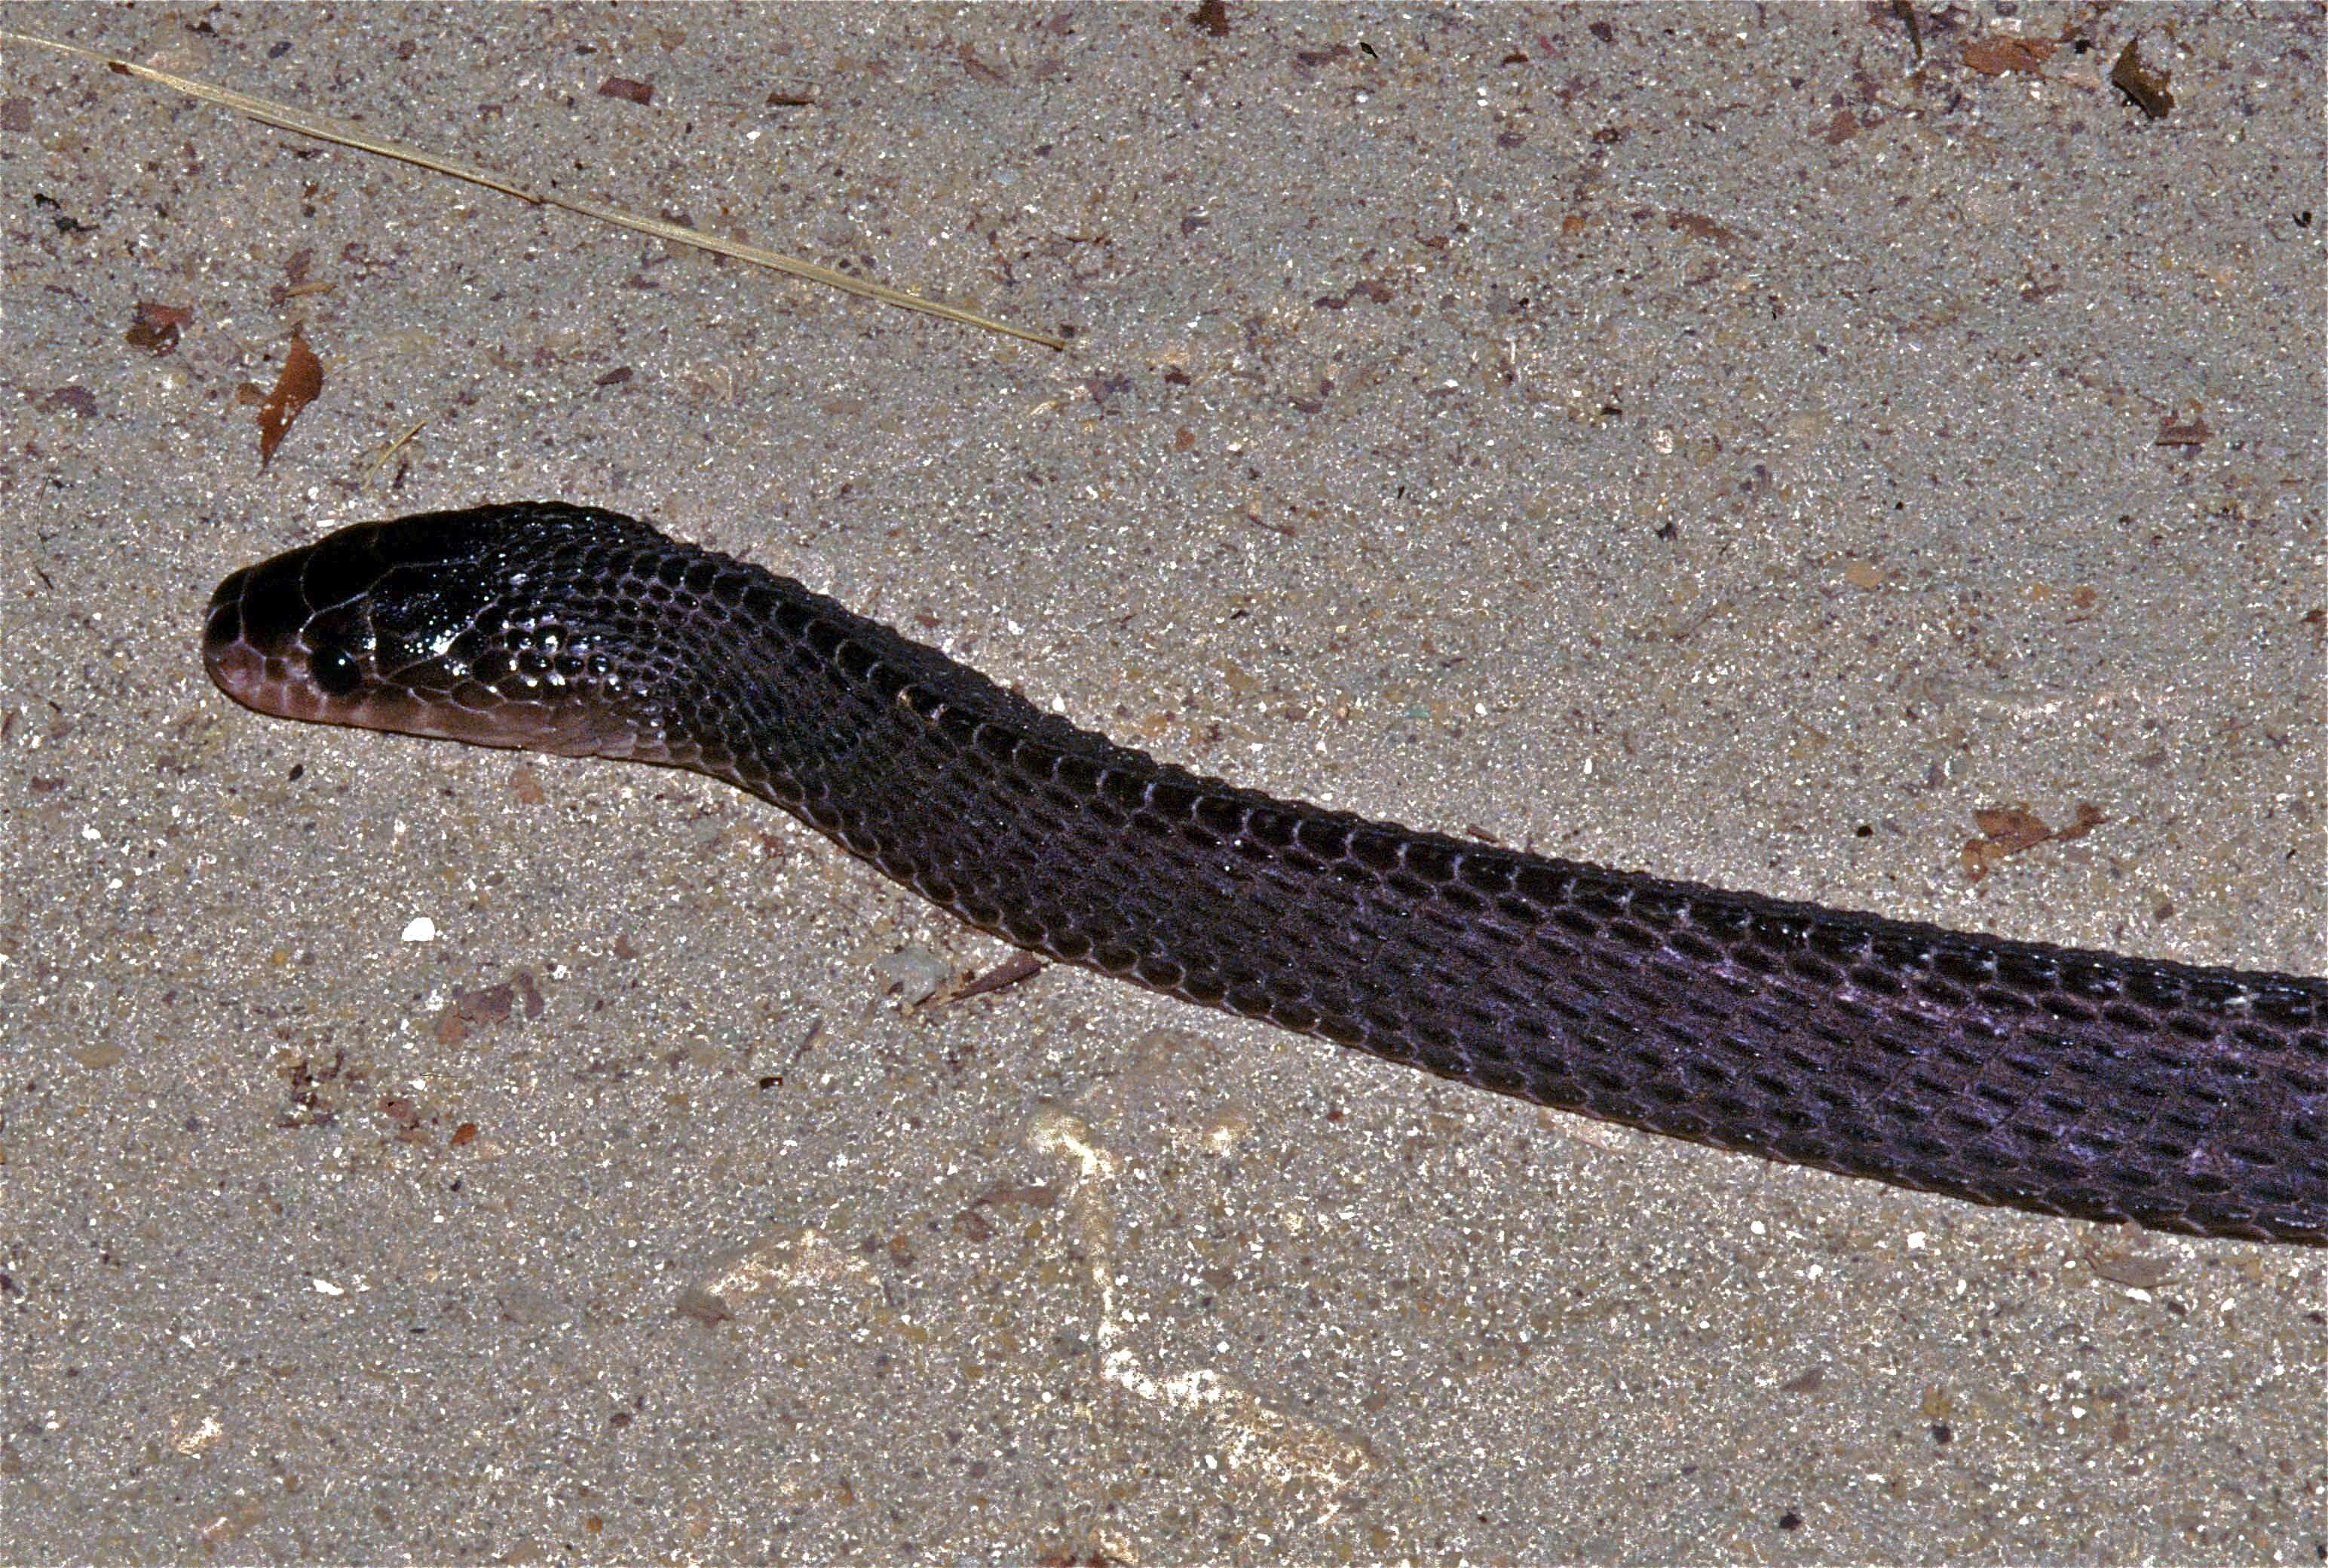 Image of Gonionotophis Boulenger 1893